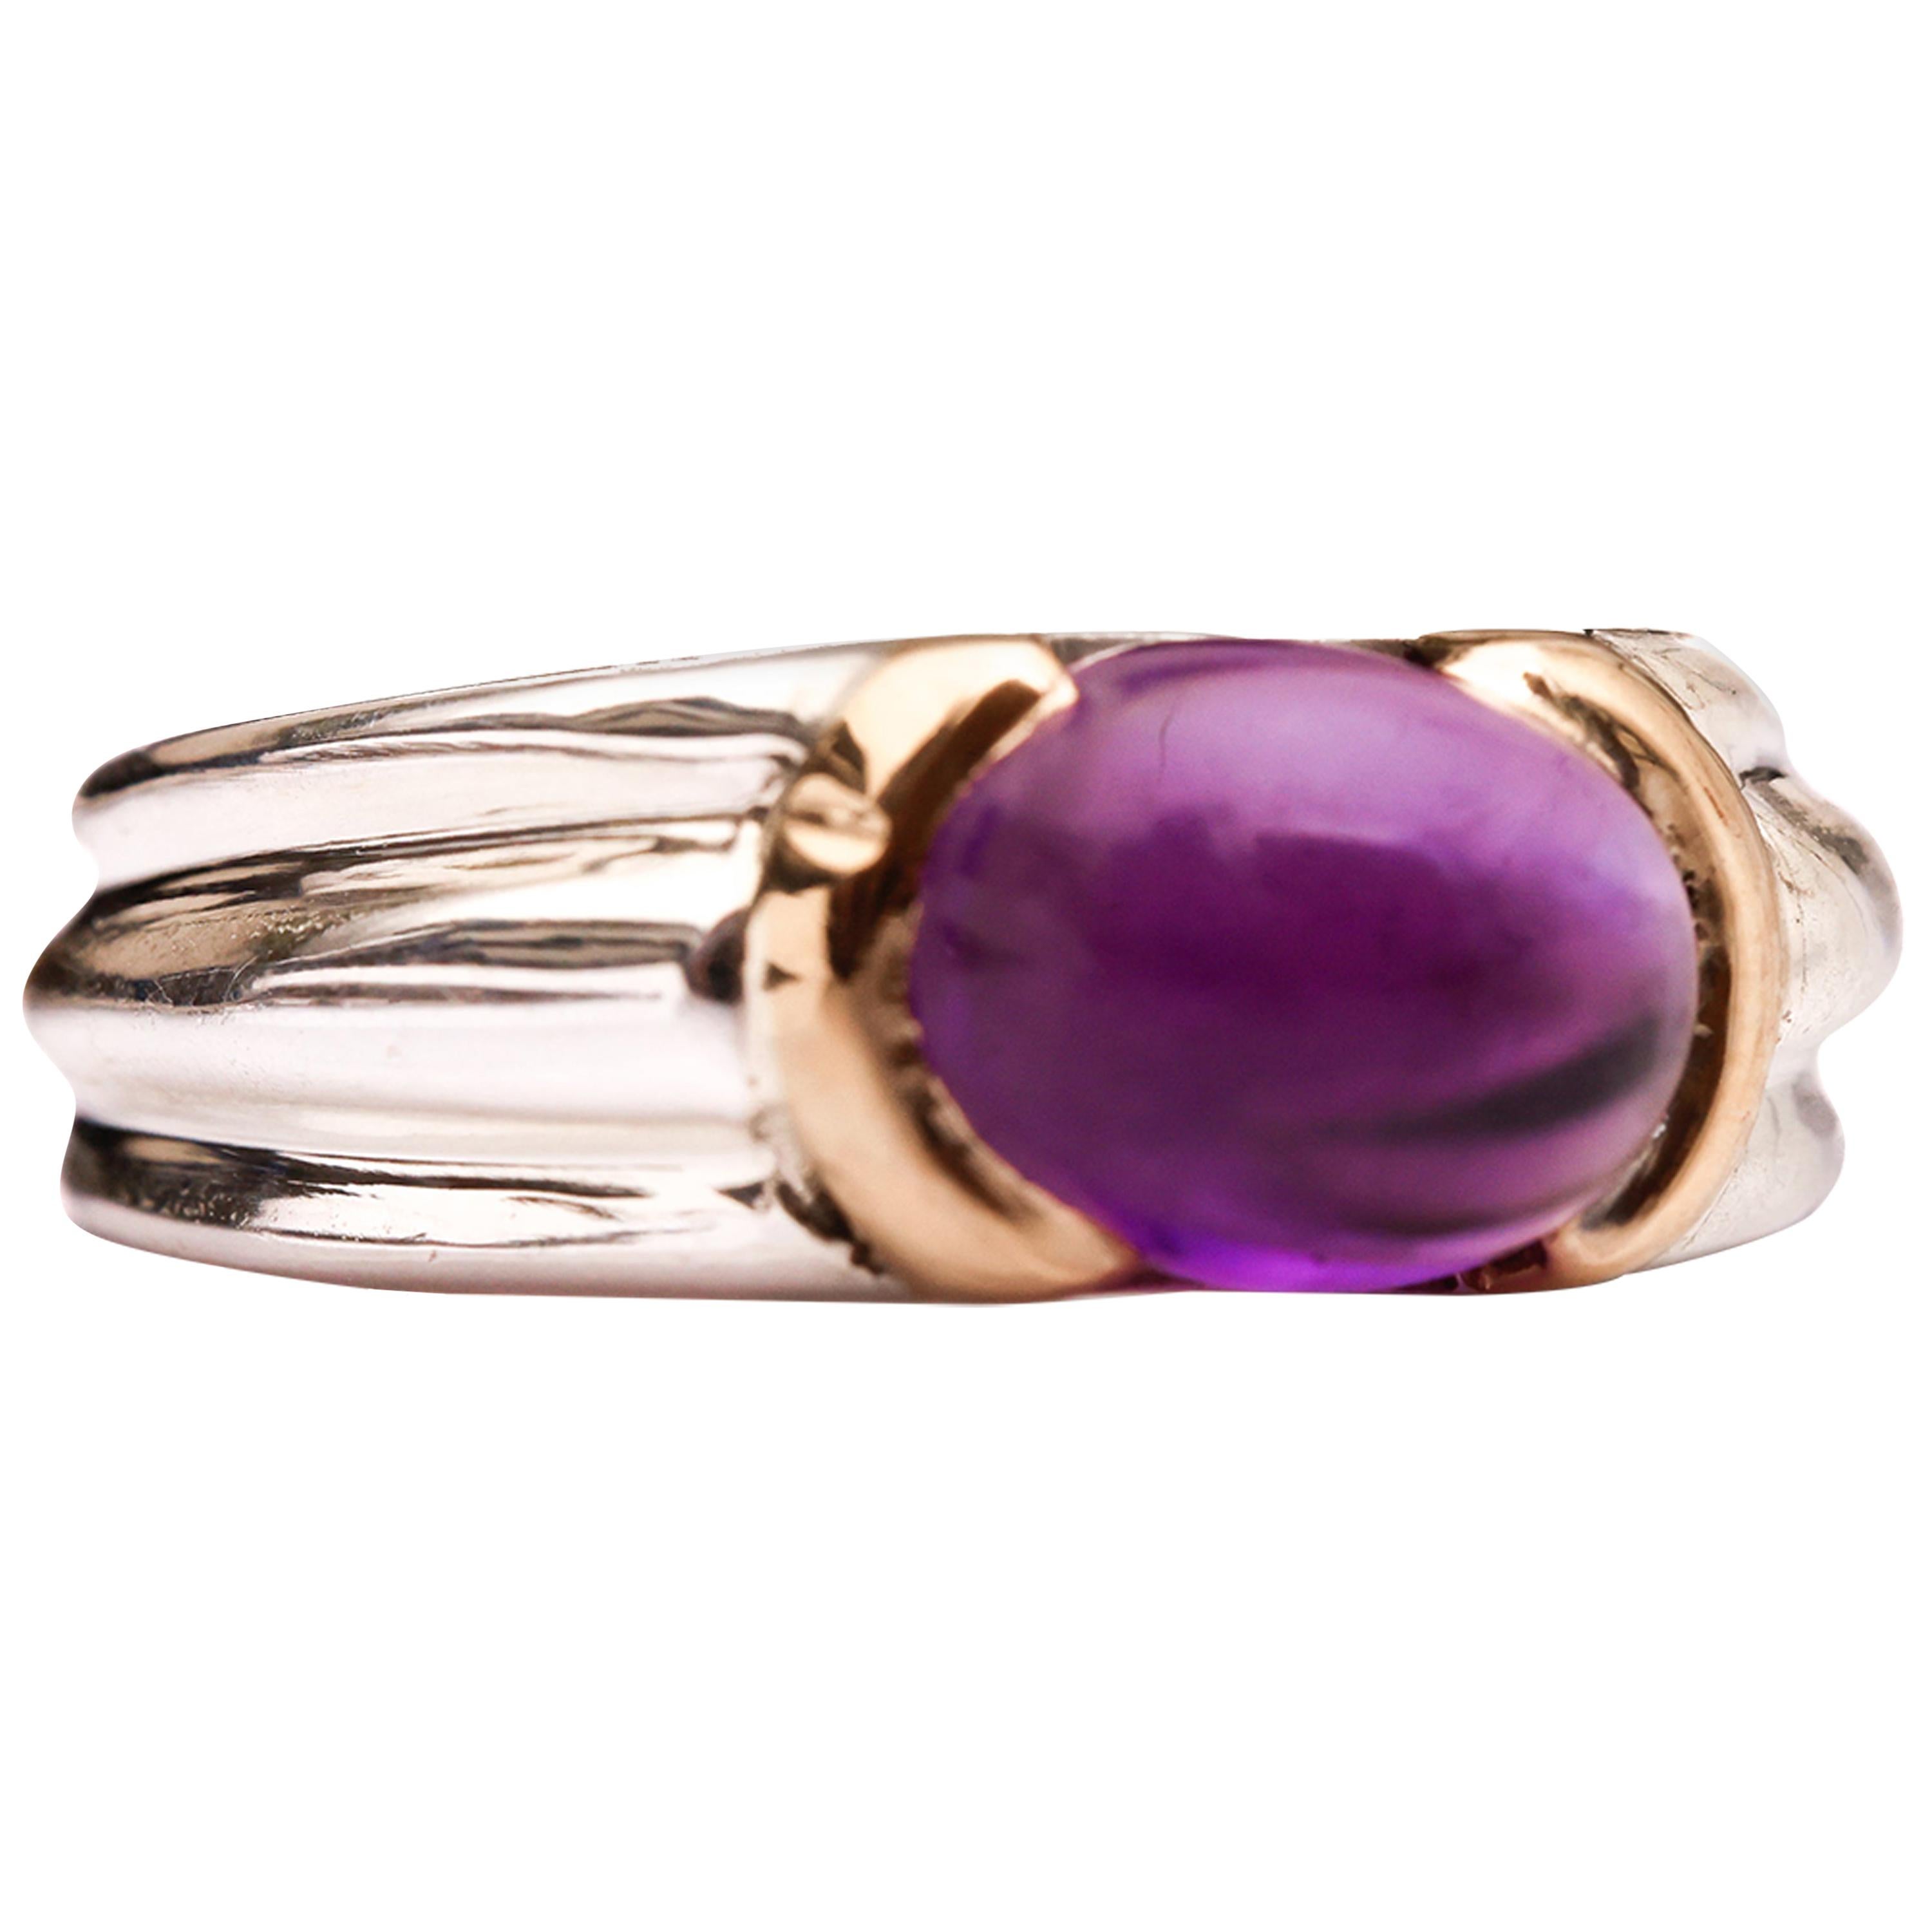 Tiffany & Co. Amethyst Ring in Two-Tone Gold